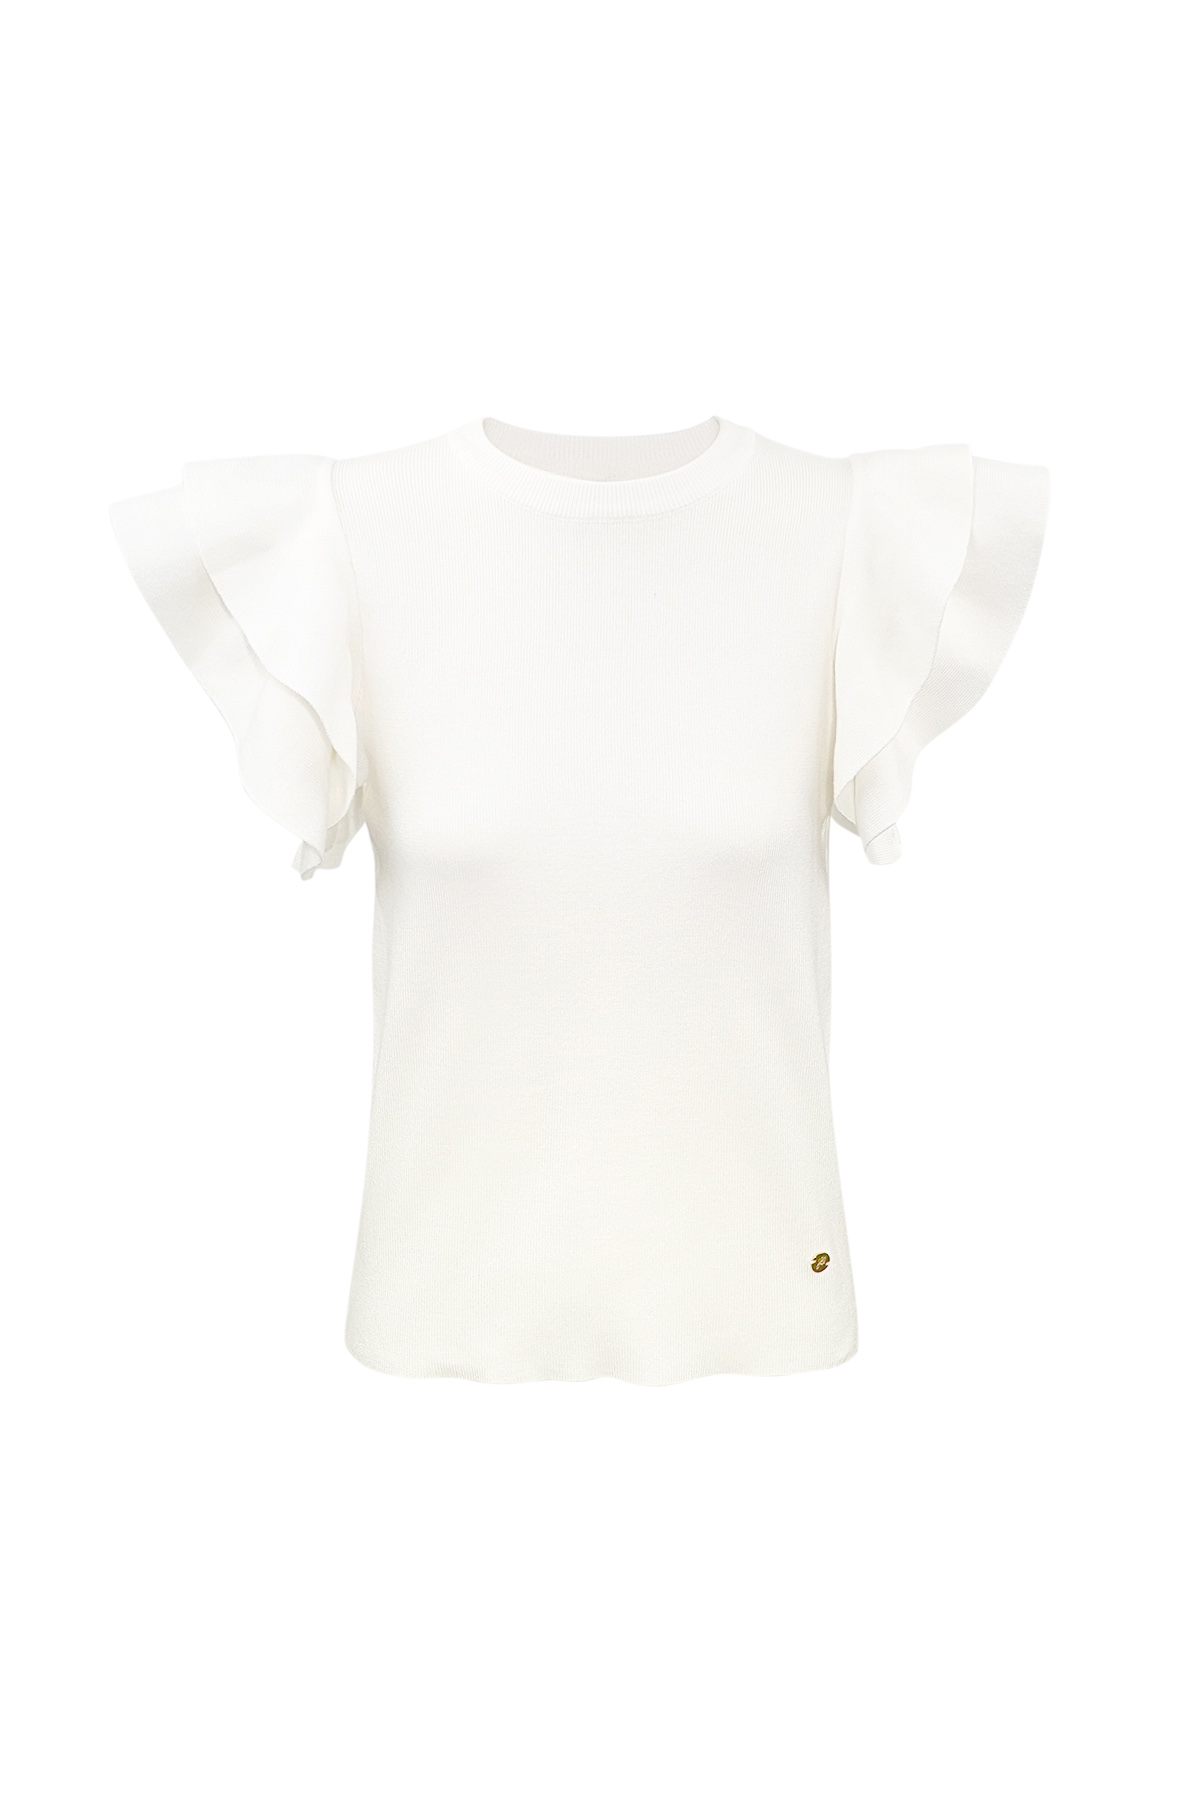 Top open flare sleeve - white h5 